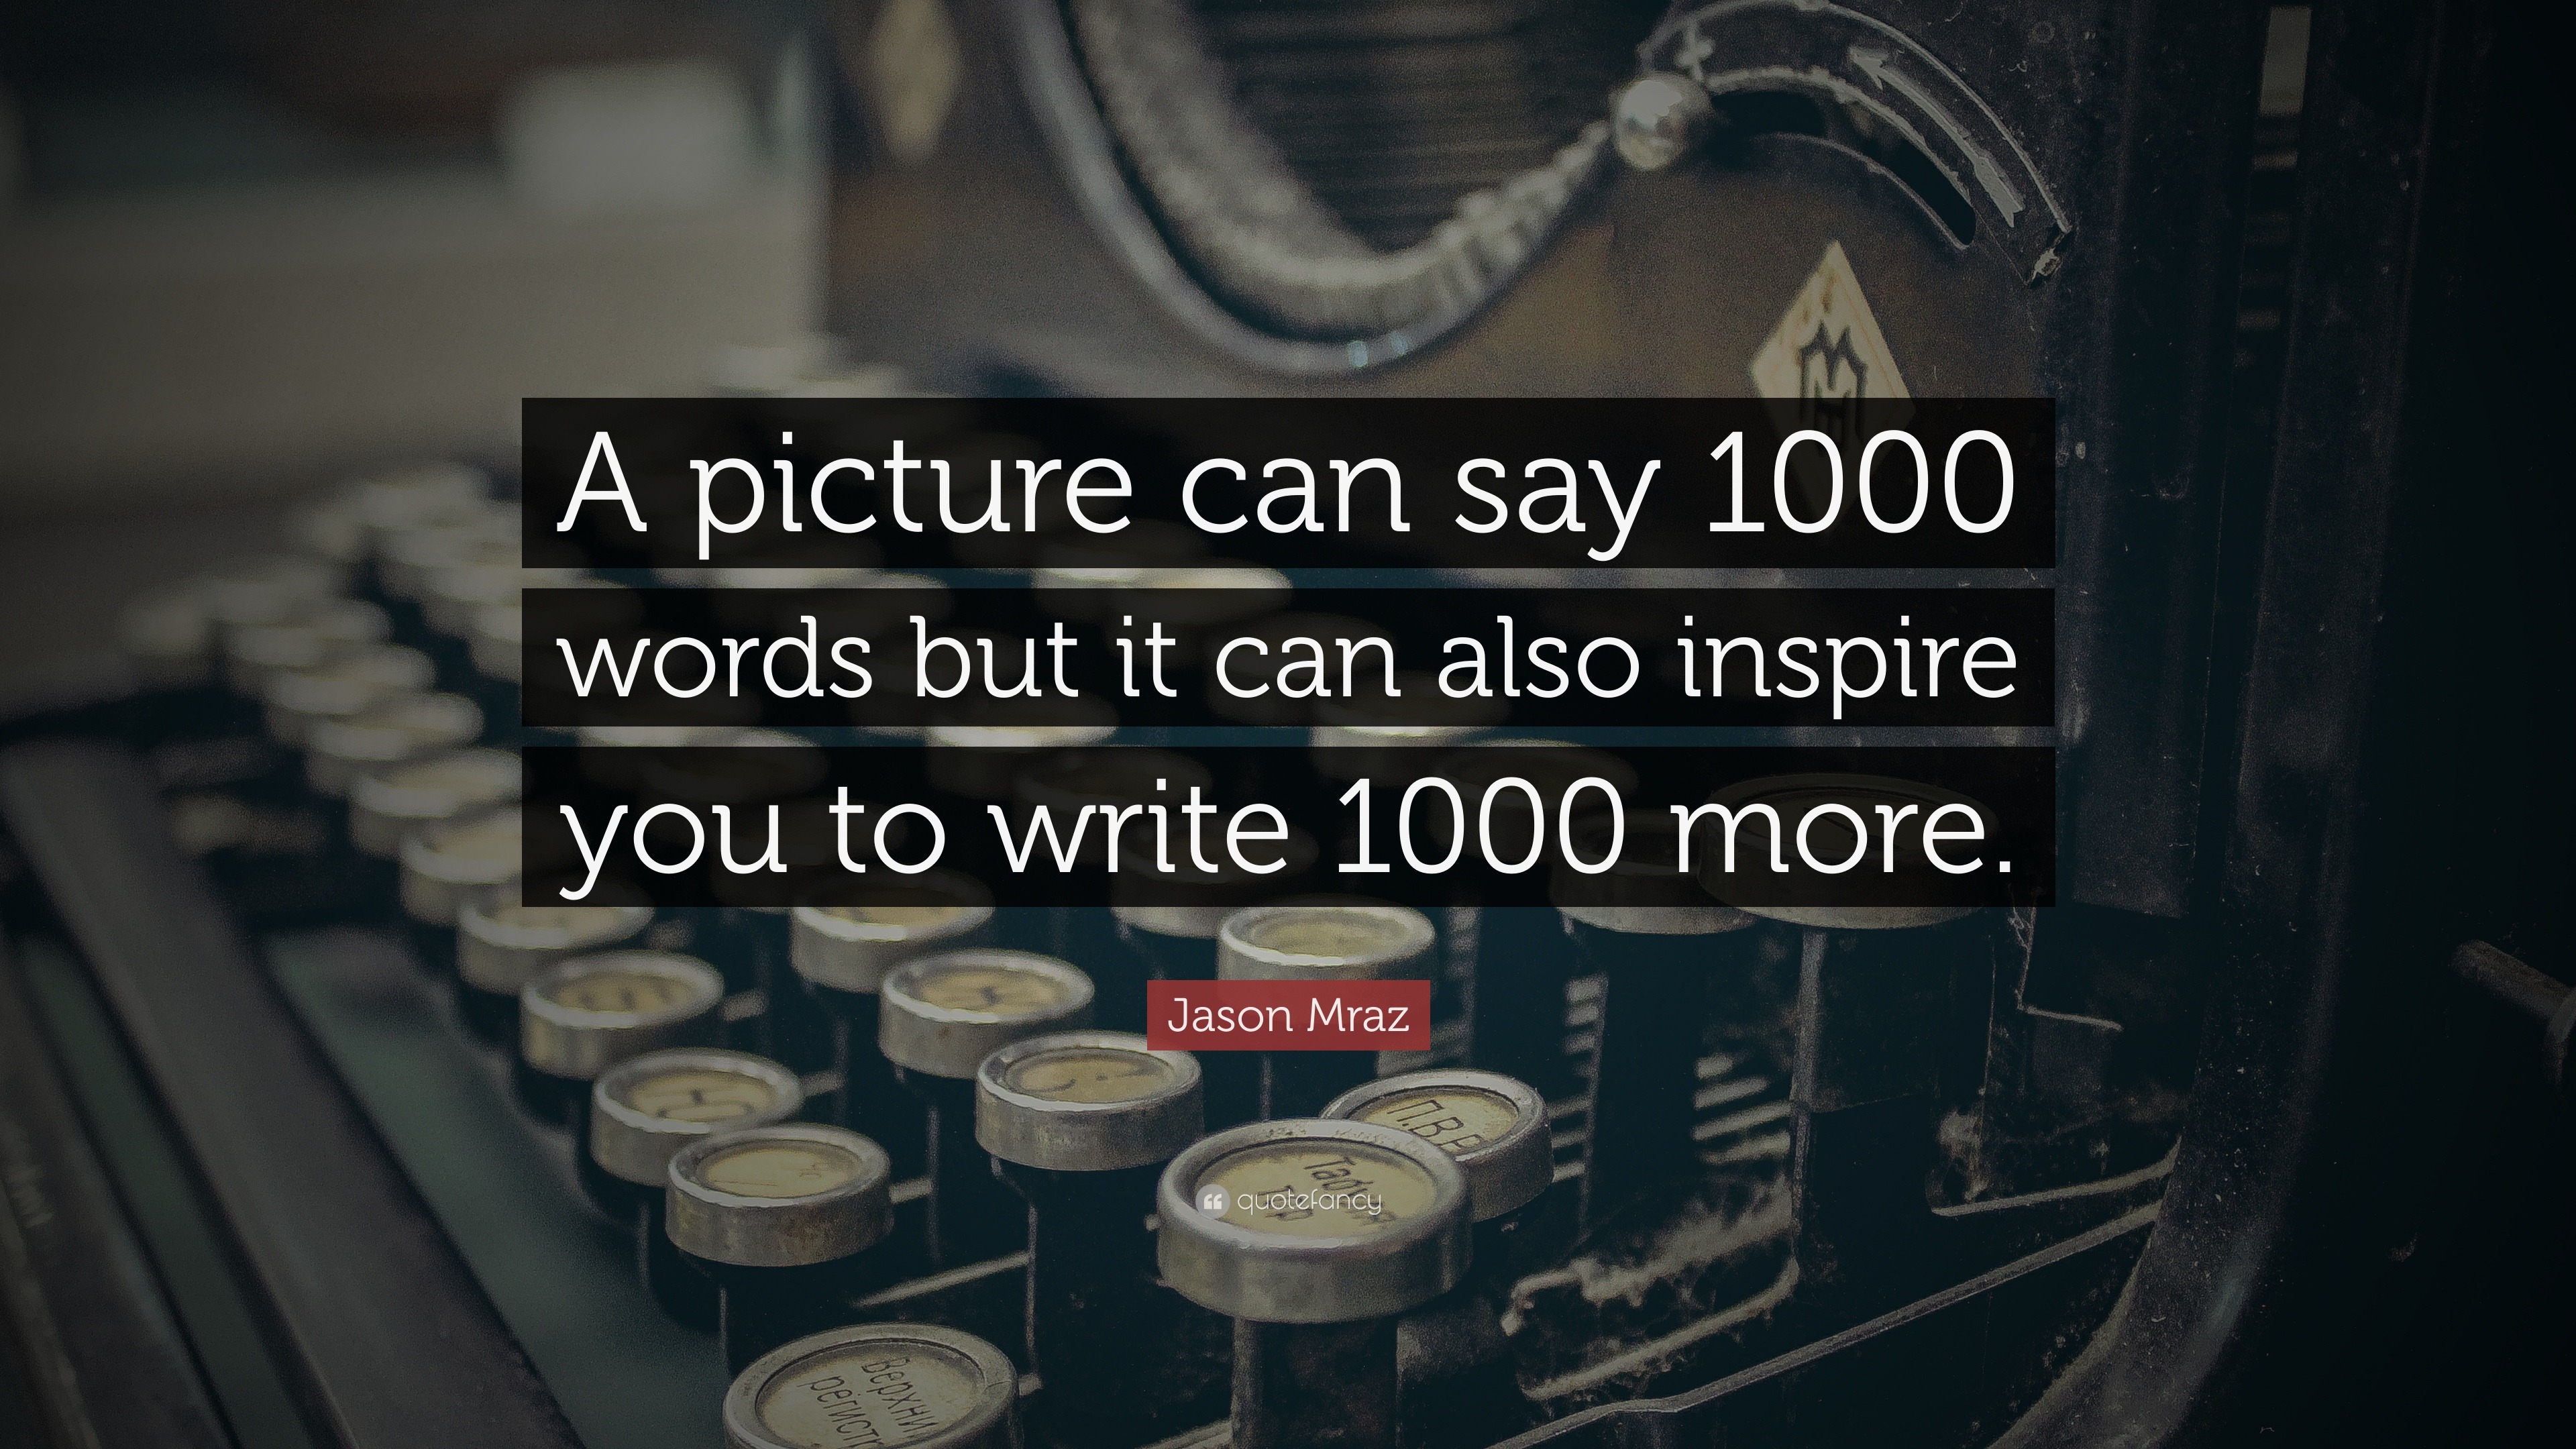 Jason Mraz Quote: “A picture can say 19 words but it can also